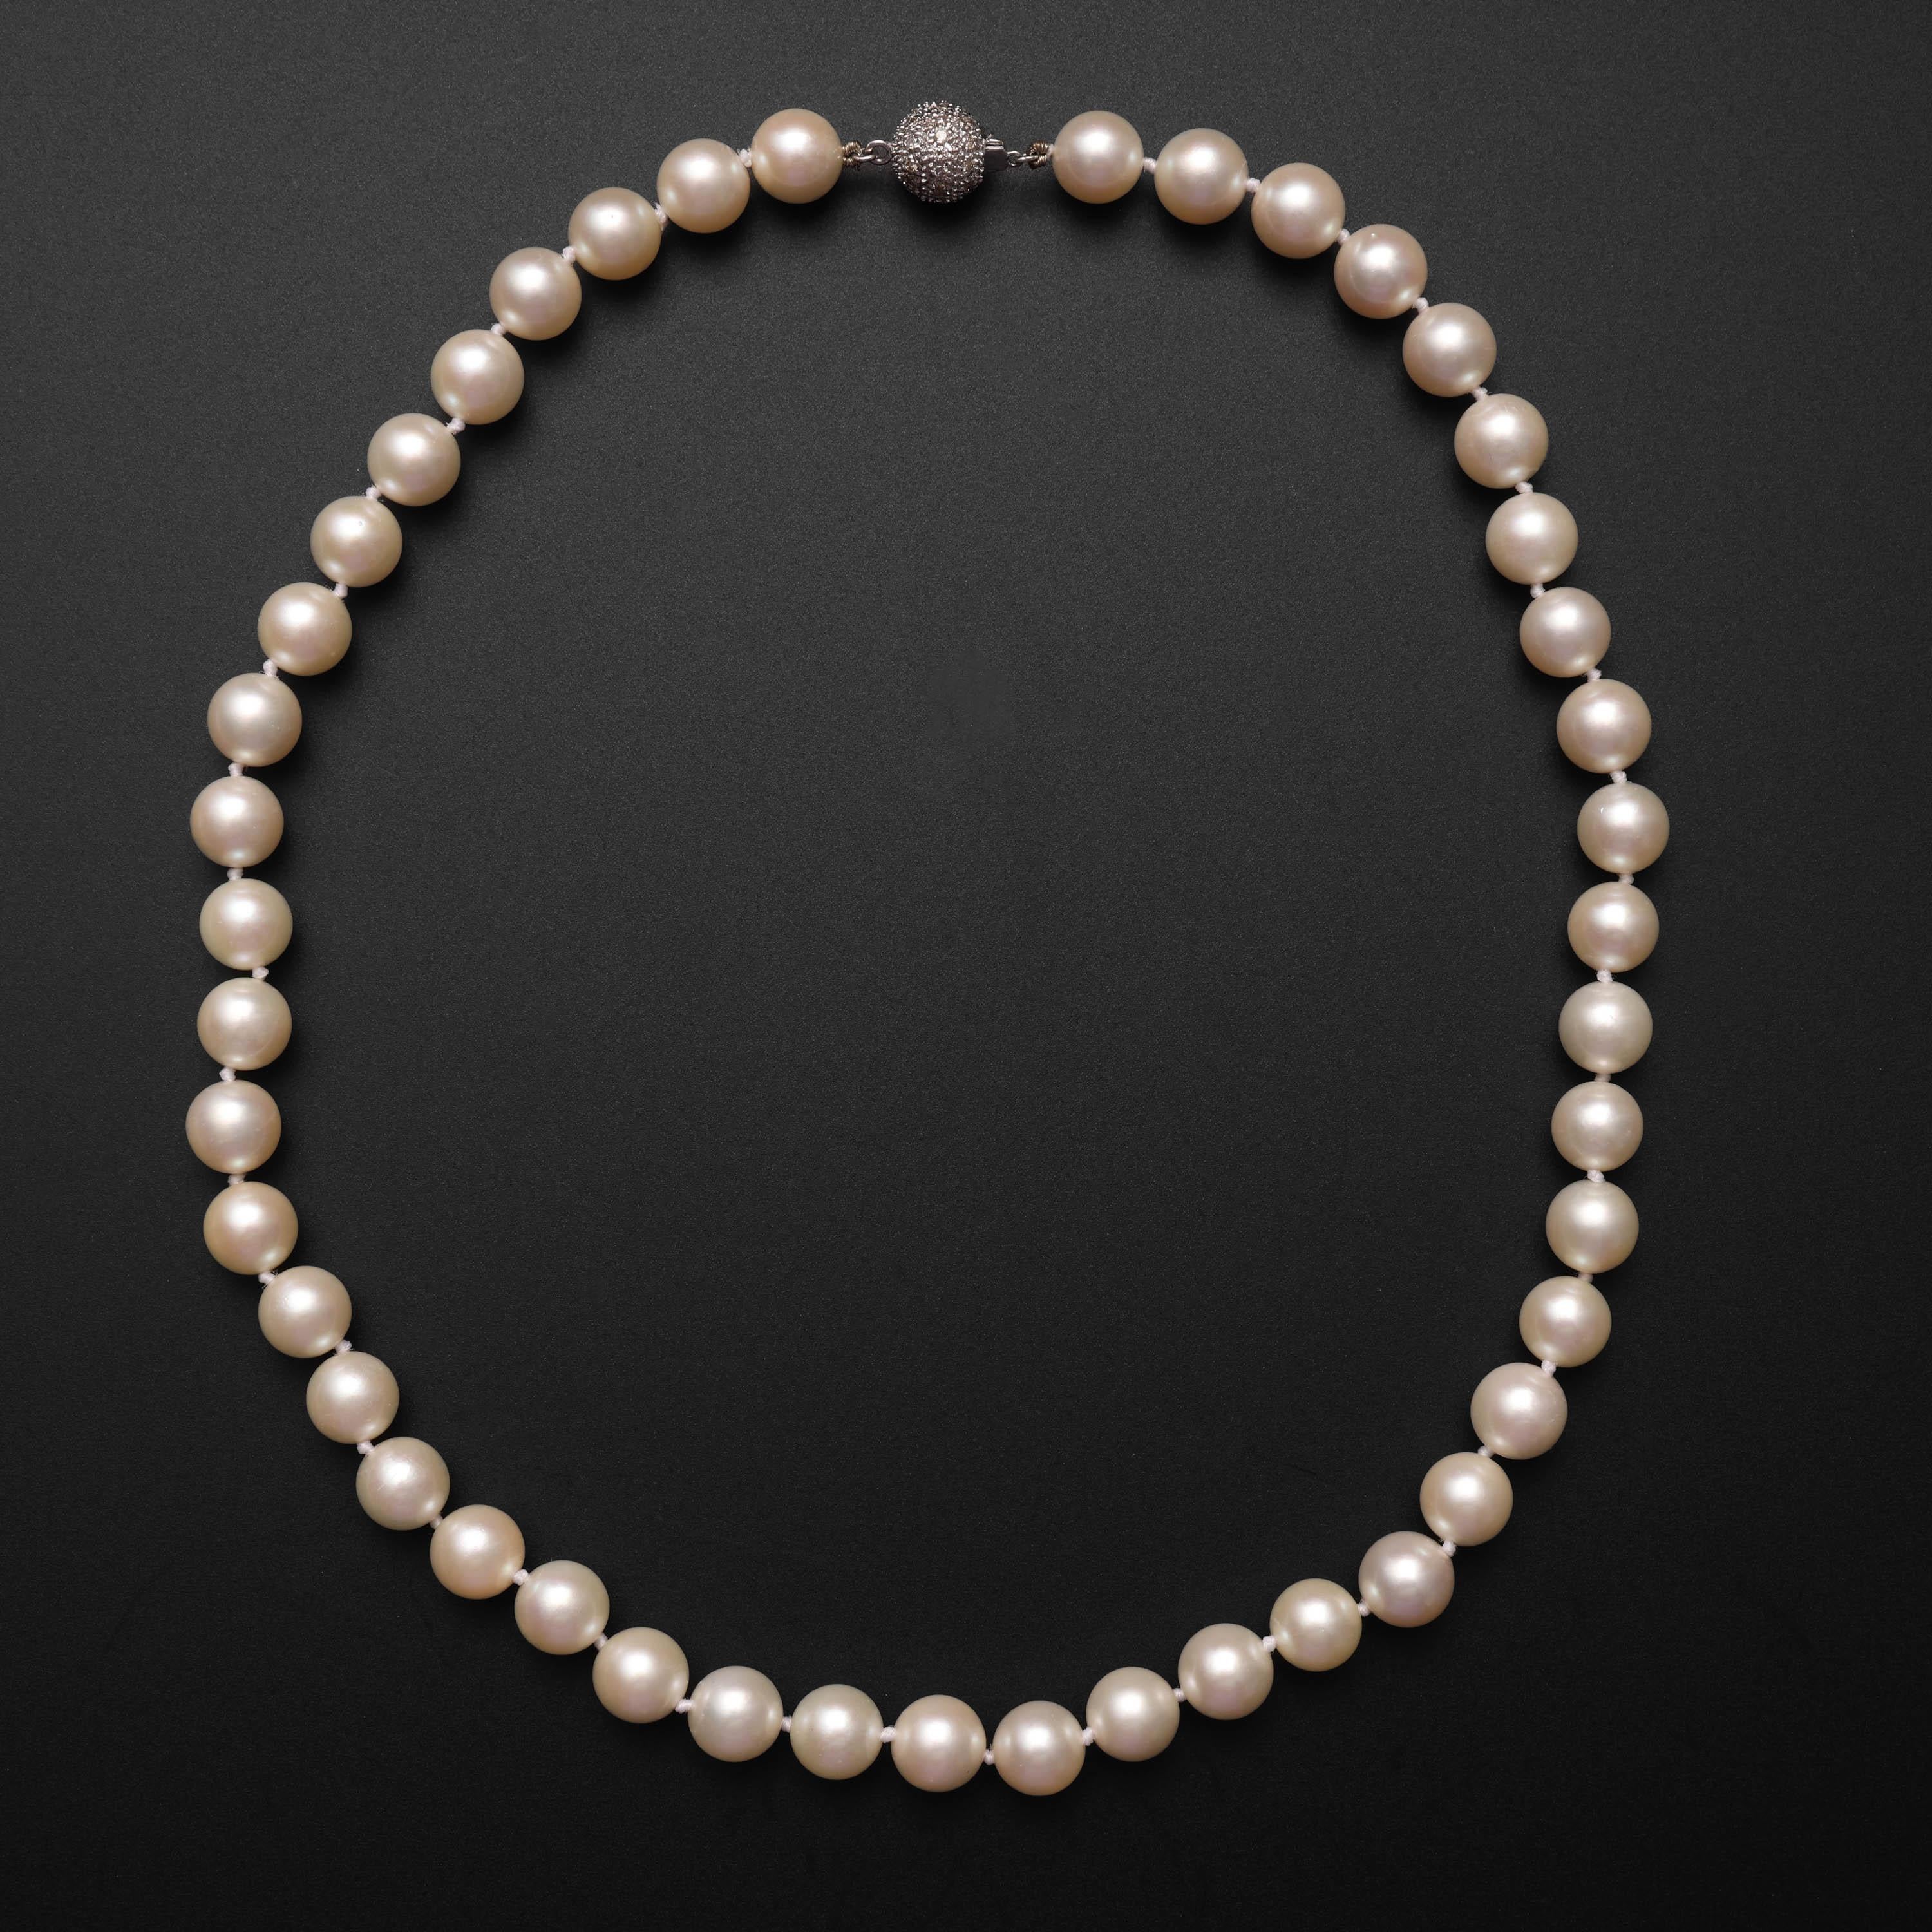 This is a stunning vintage pearl necklace measuring 18 inches in length and composed of 55 9mm-9.4mm round cultured Akoya pearls and finished with an 18K white gold beaded ball clasp which glitters with a multitude of small full-cut diamonds that